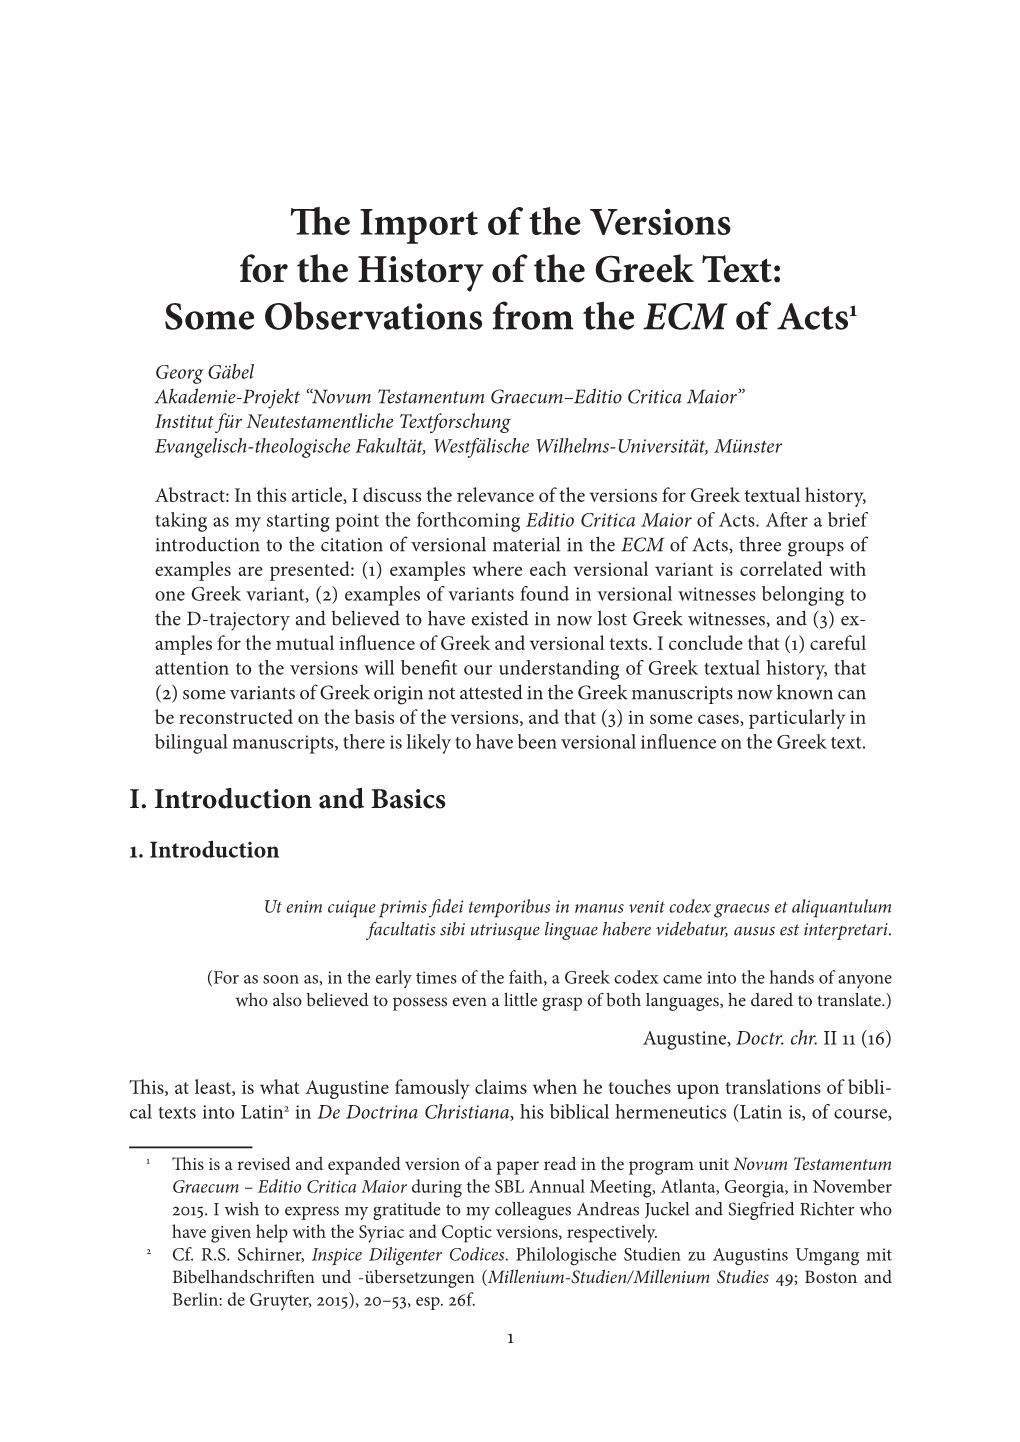 The Import of the Versions for the History of the Greek Text: Some Observations from the ECM of Acts1